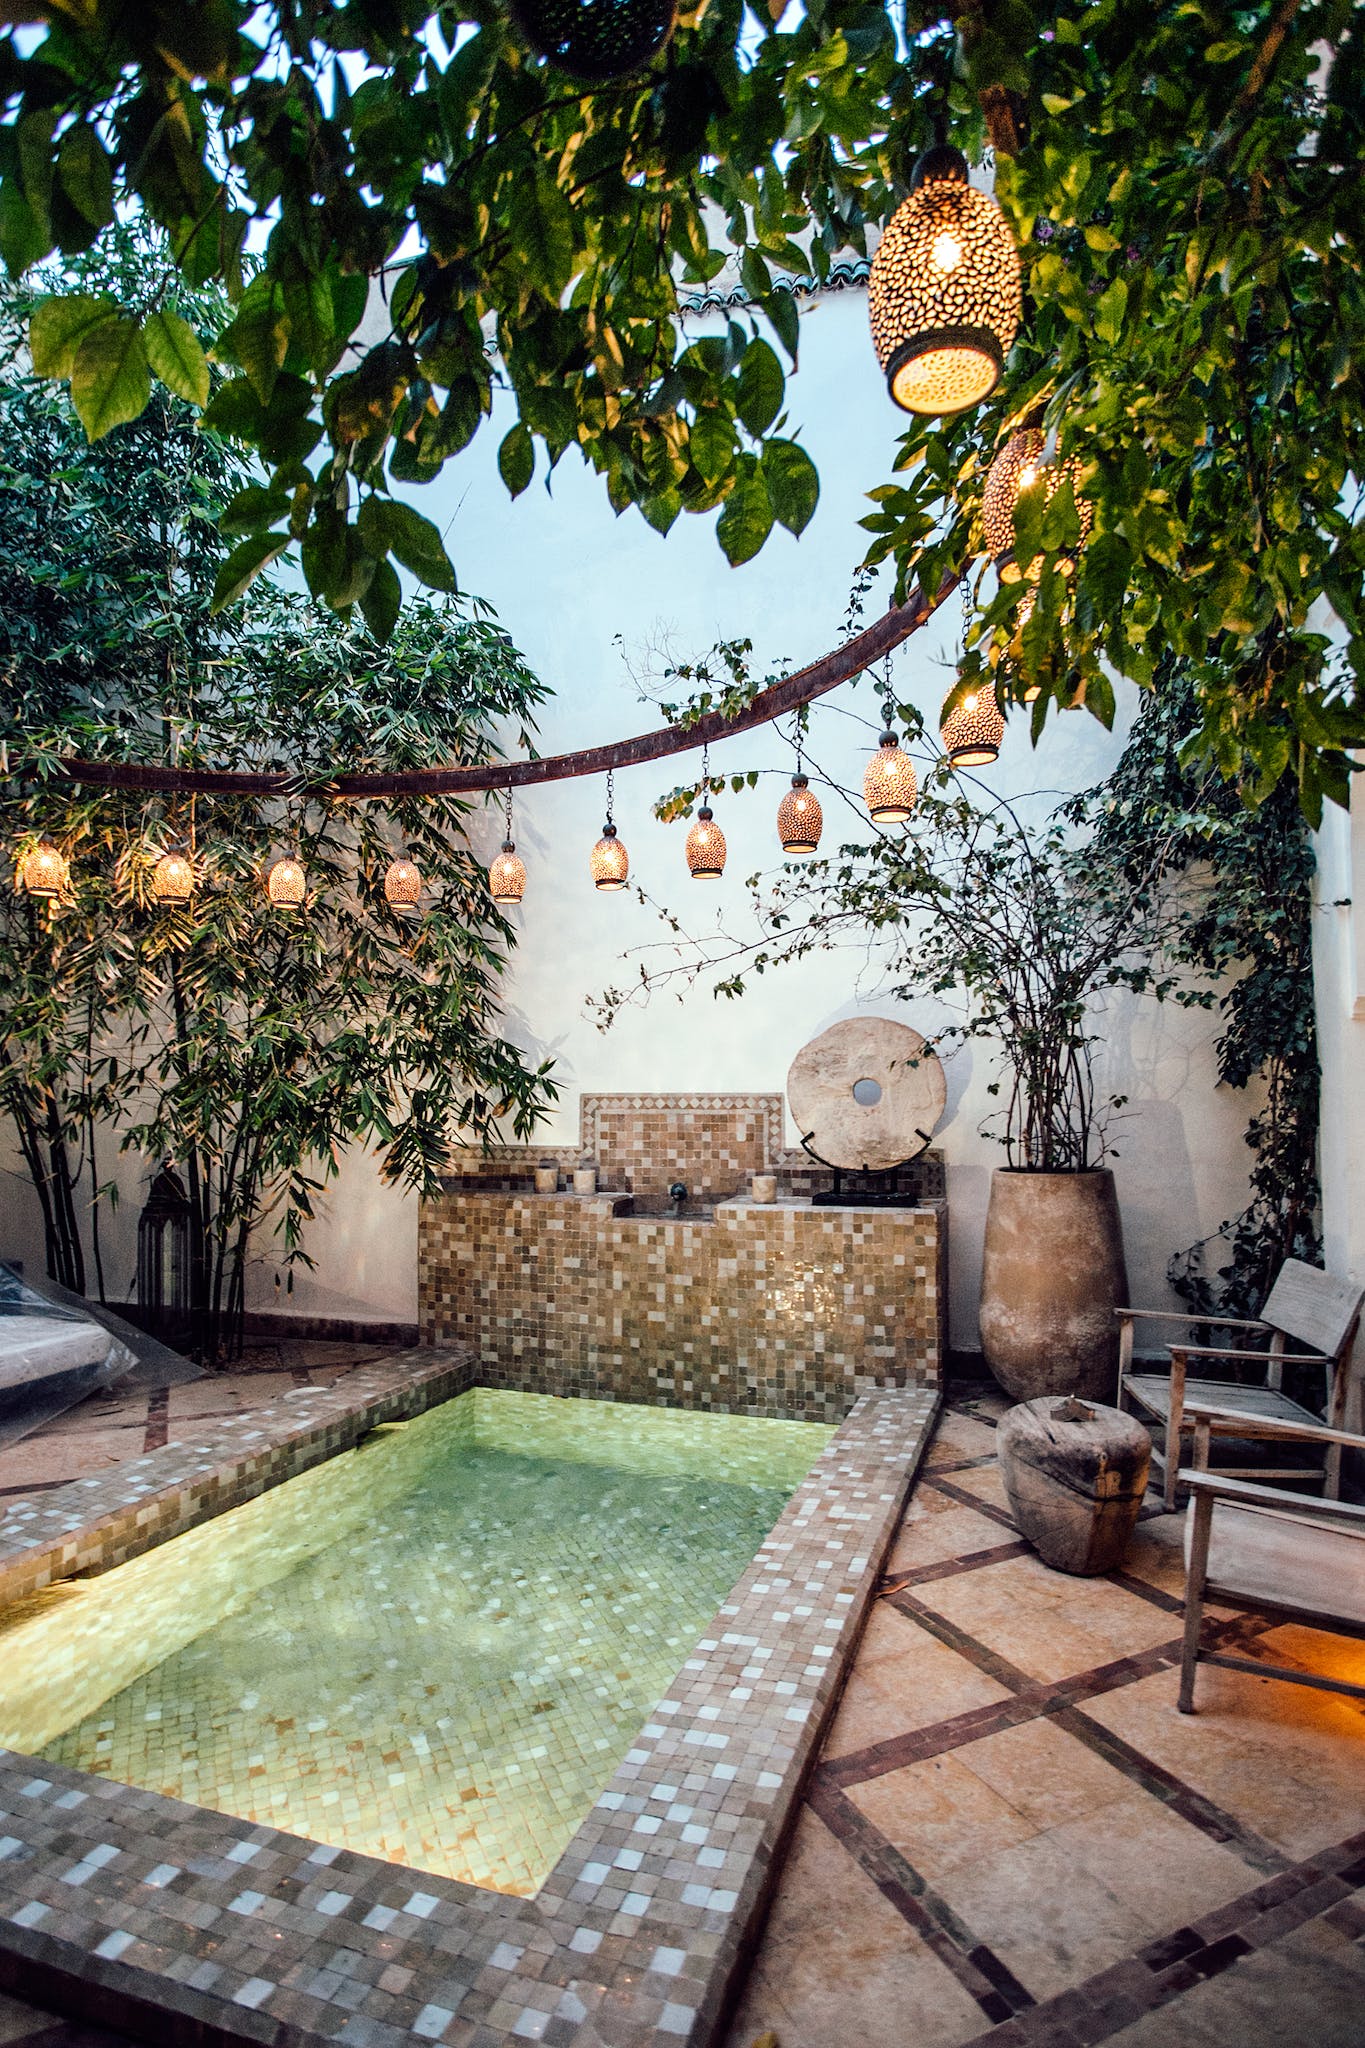 Traditional oriental hammam pool on exotic resort spa terrace decorated with lush plants  and stylish lanterns